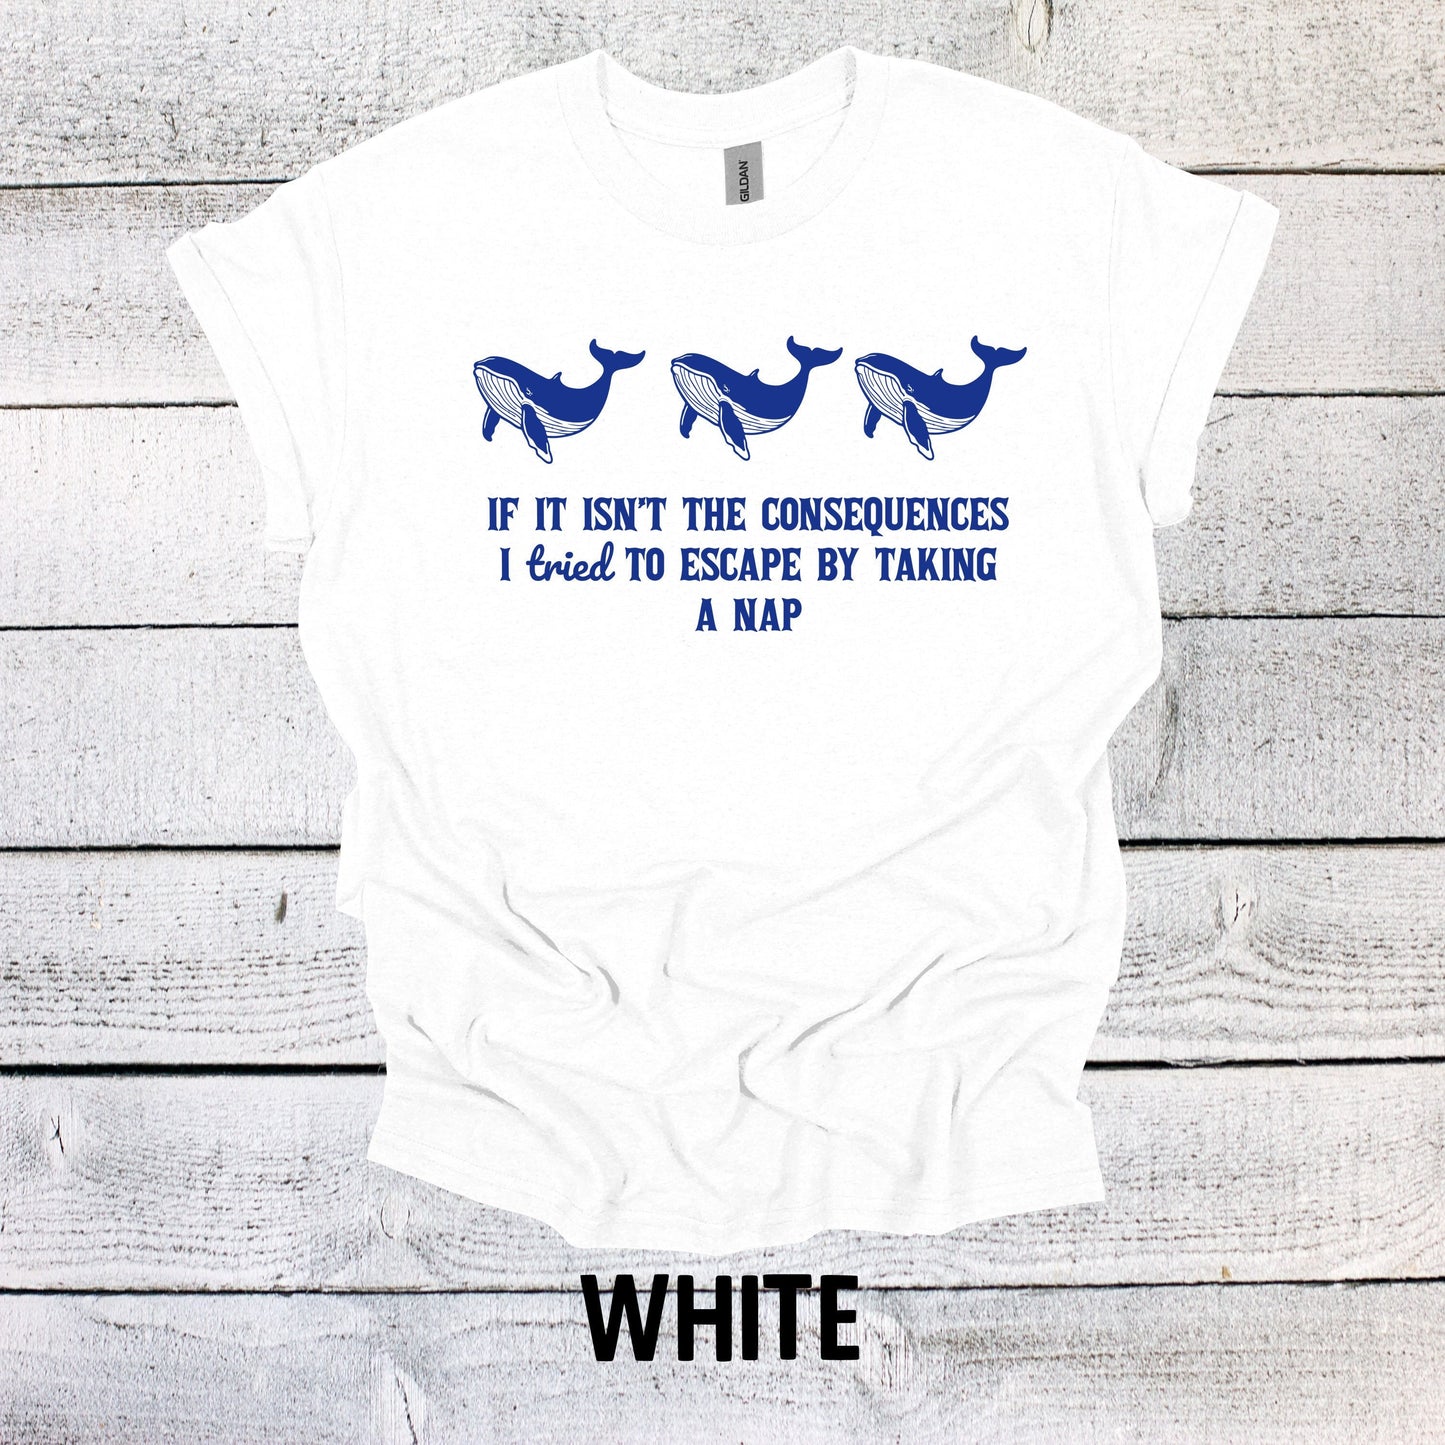 Whale Whale Whale if it isn't the consequences Shirt Graphic Shirt Adult Vintage Funny Shirt Nostalgia Cotton Shirt Minimalist Shirt